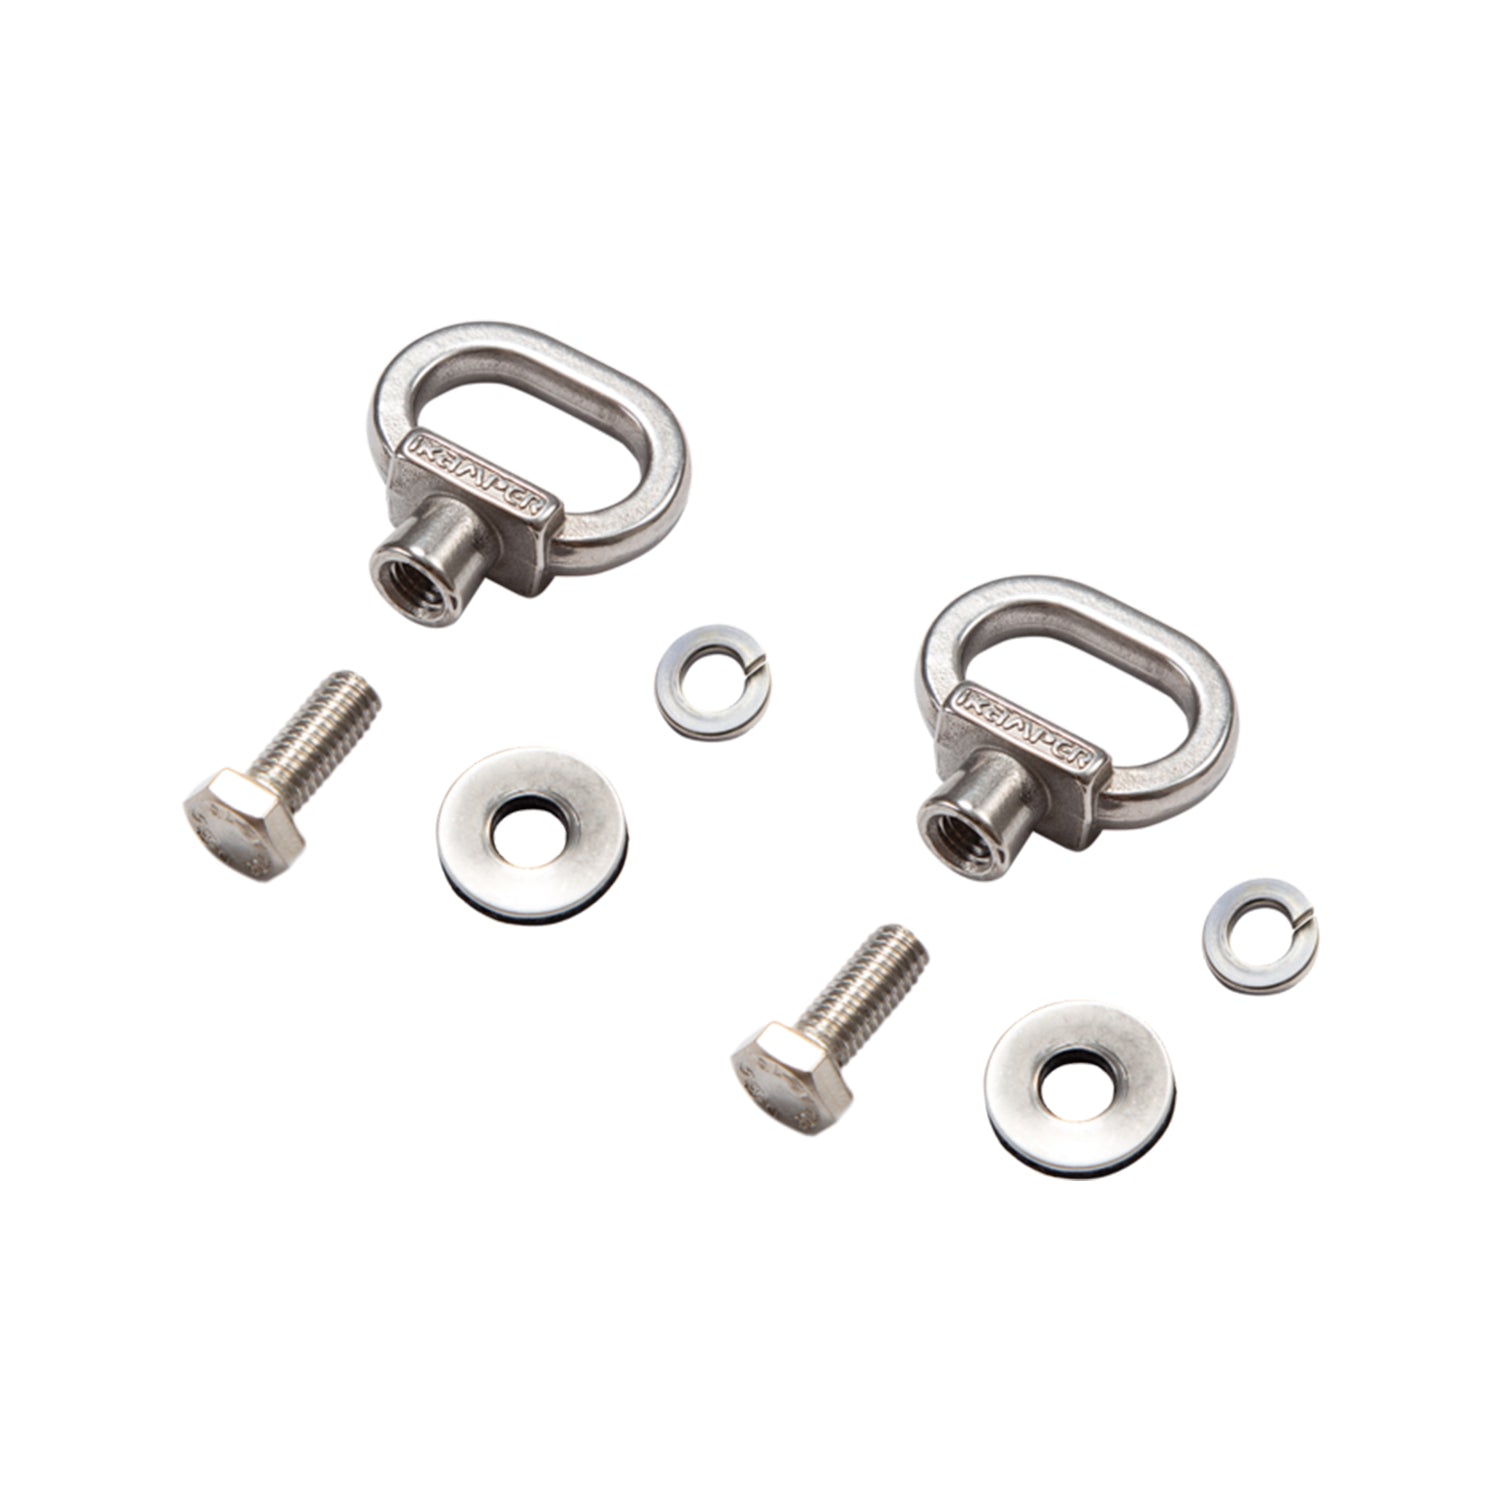 ikamper accessory rings components